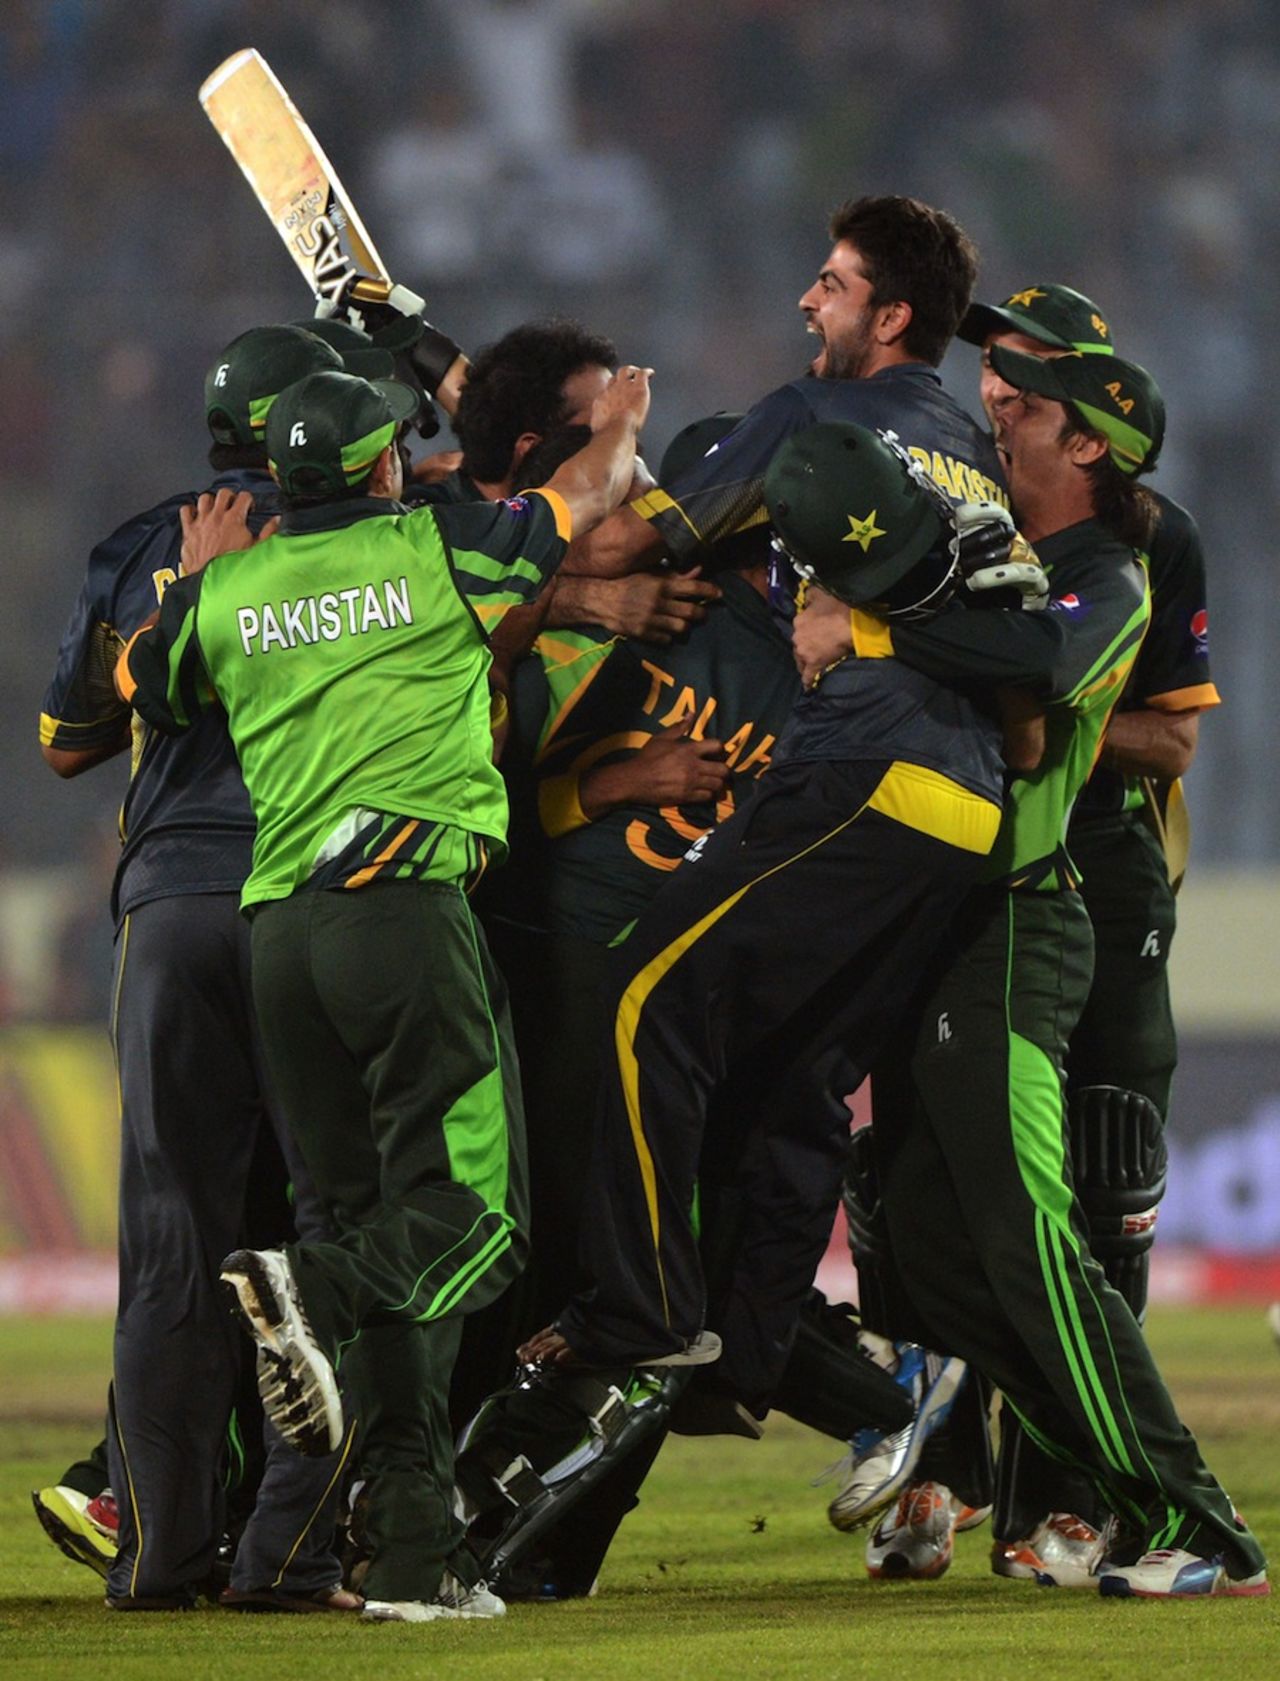 Shahid Afridi is mobbed by his team-mates, India v Pakistan, Asia Cup, Mirpur, March 2, 2014